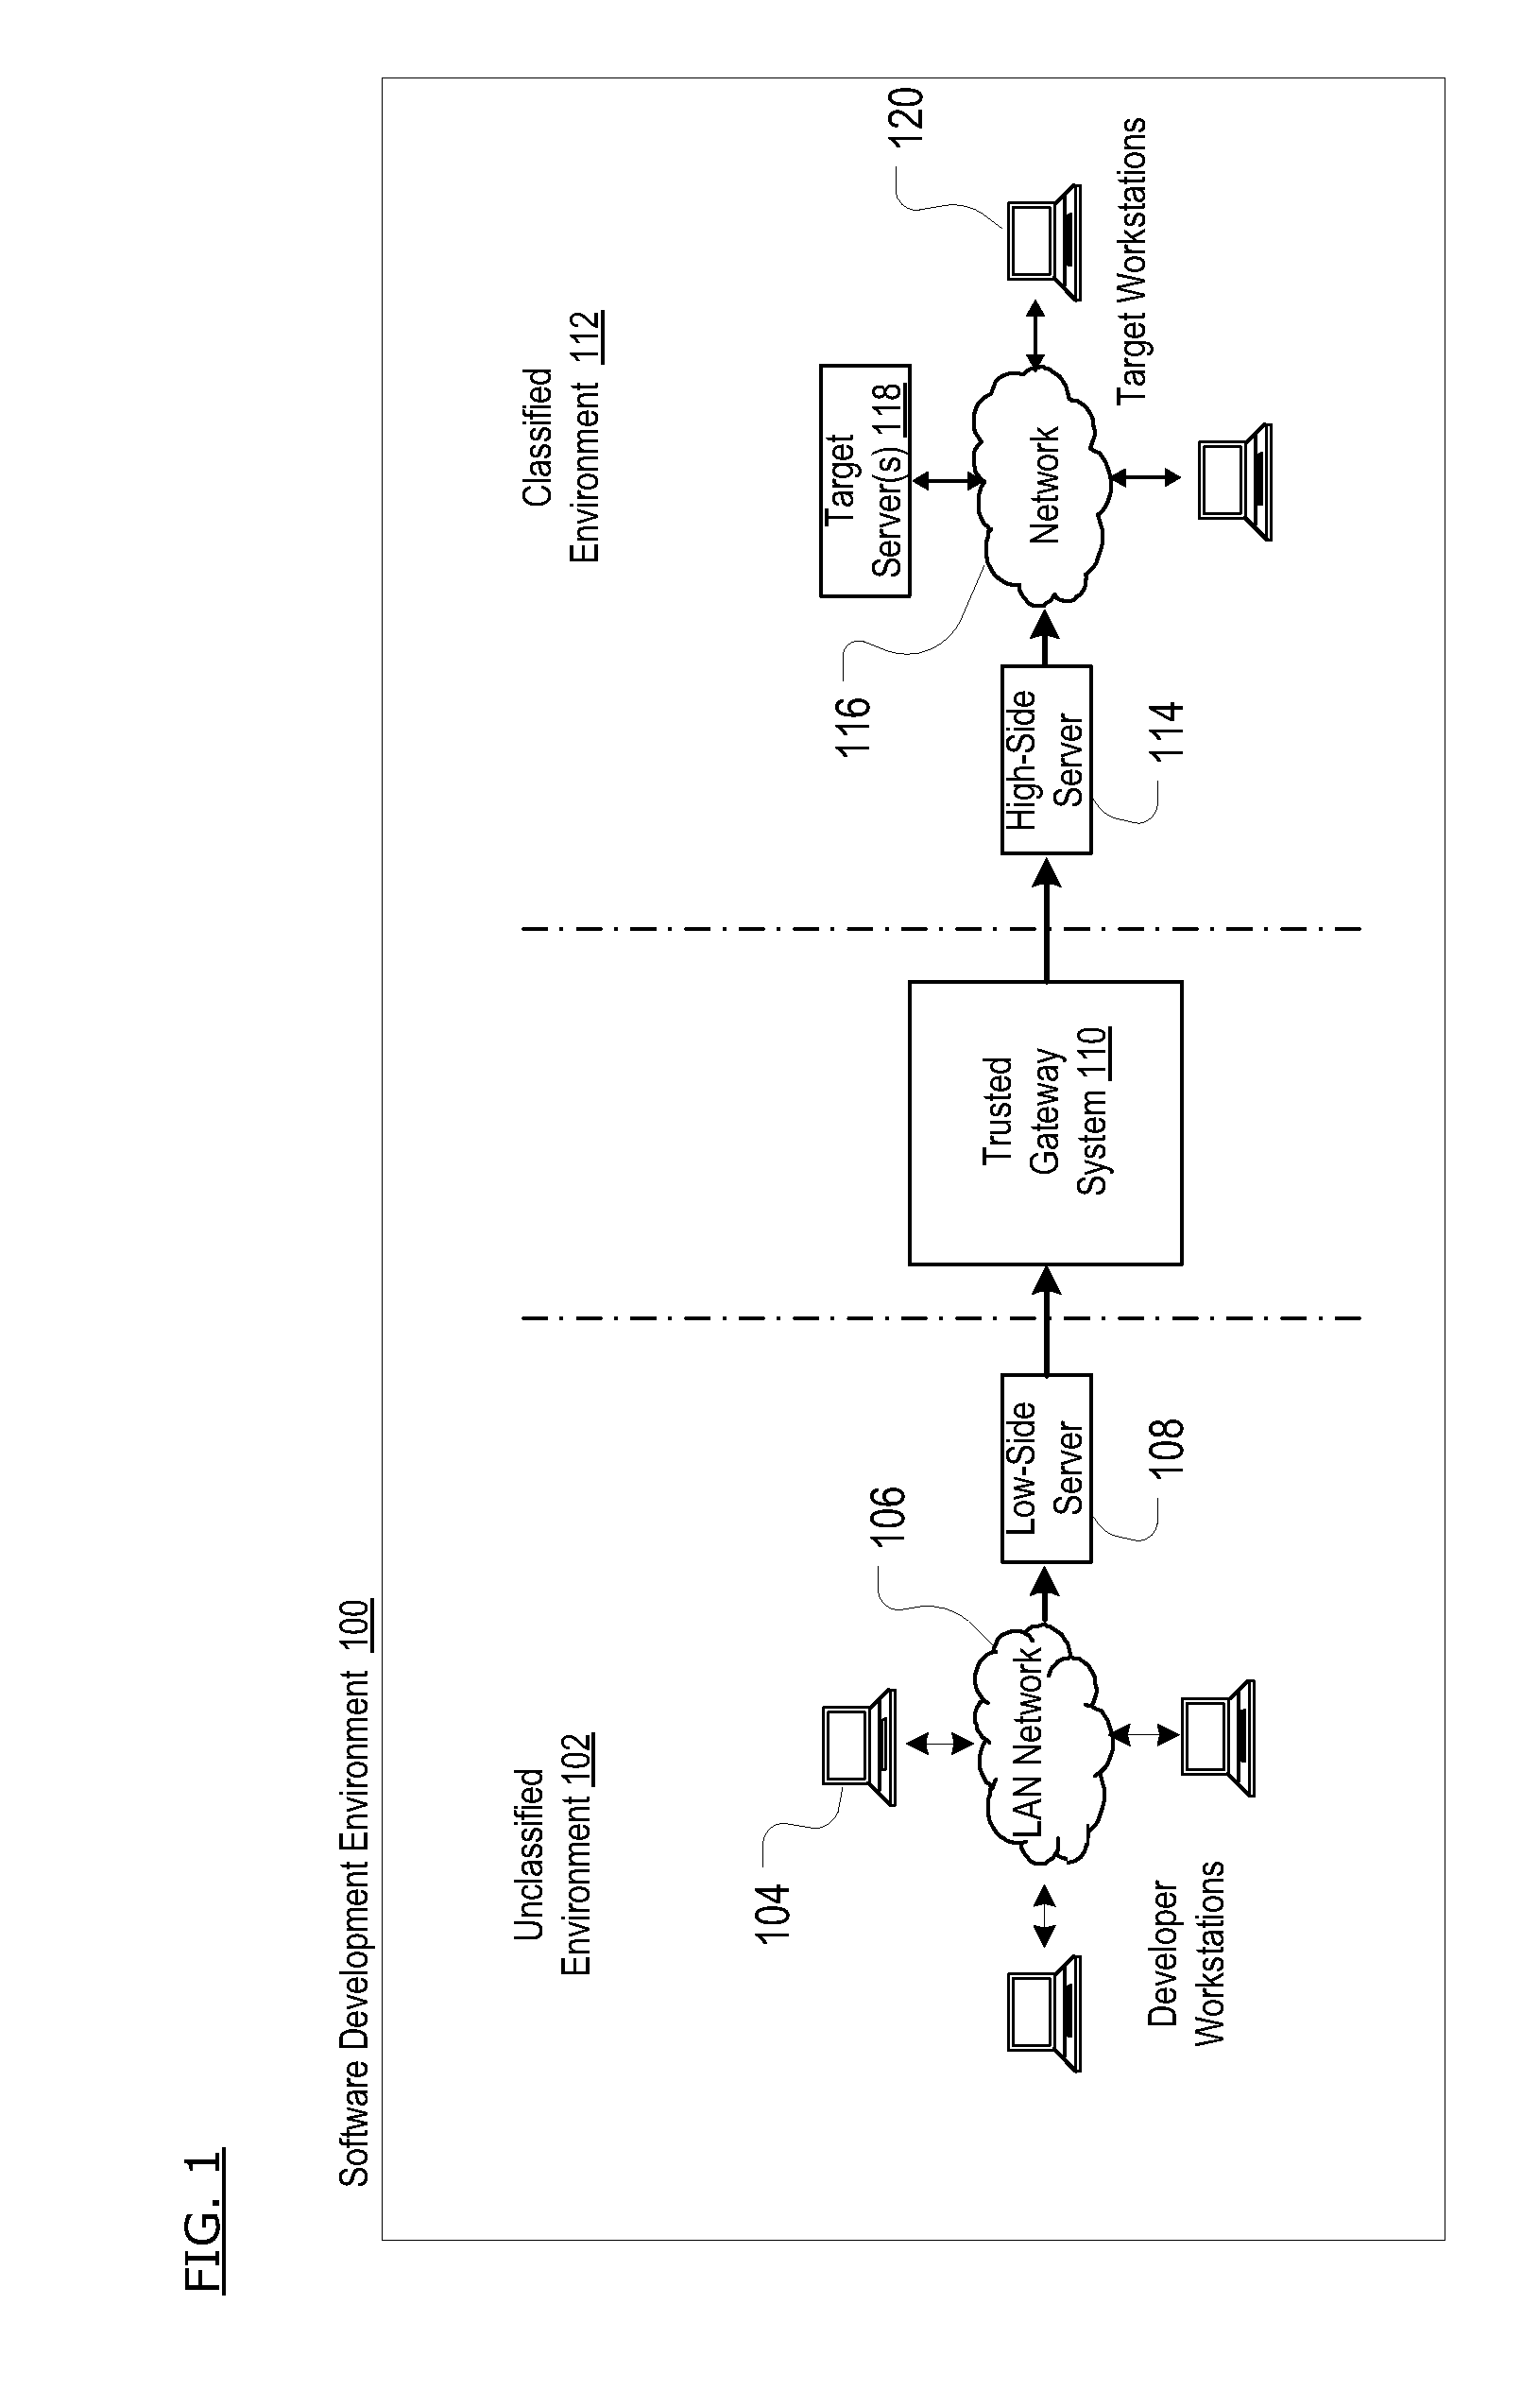 Method For Connecting Unclassified And Classified Information Systems